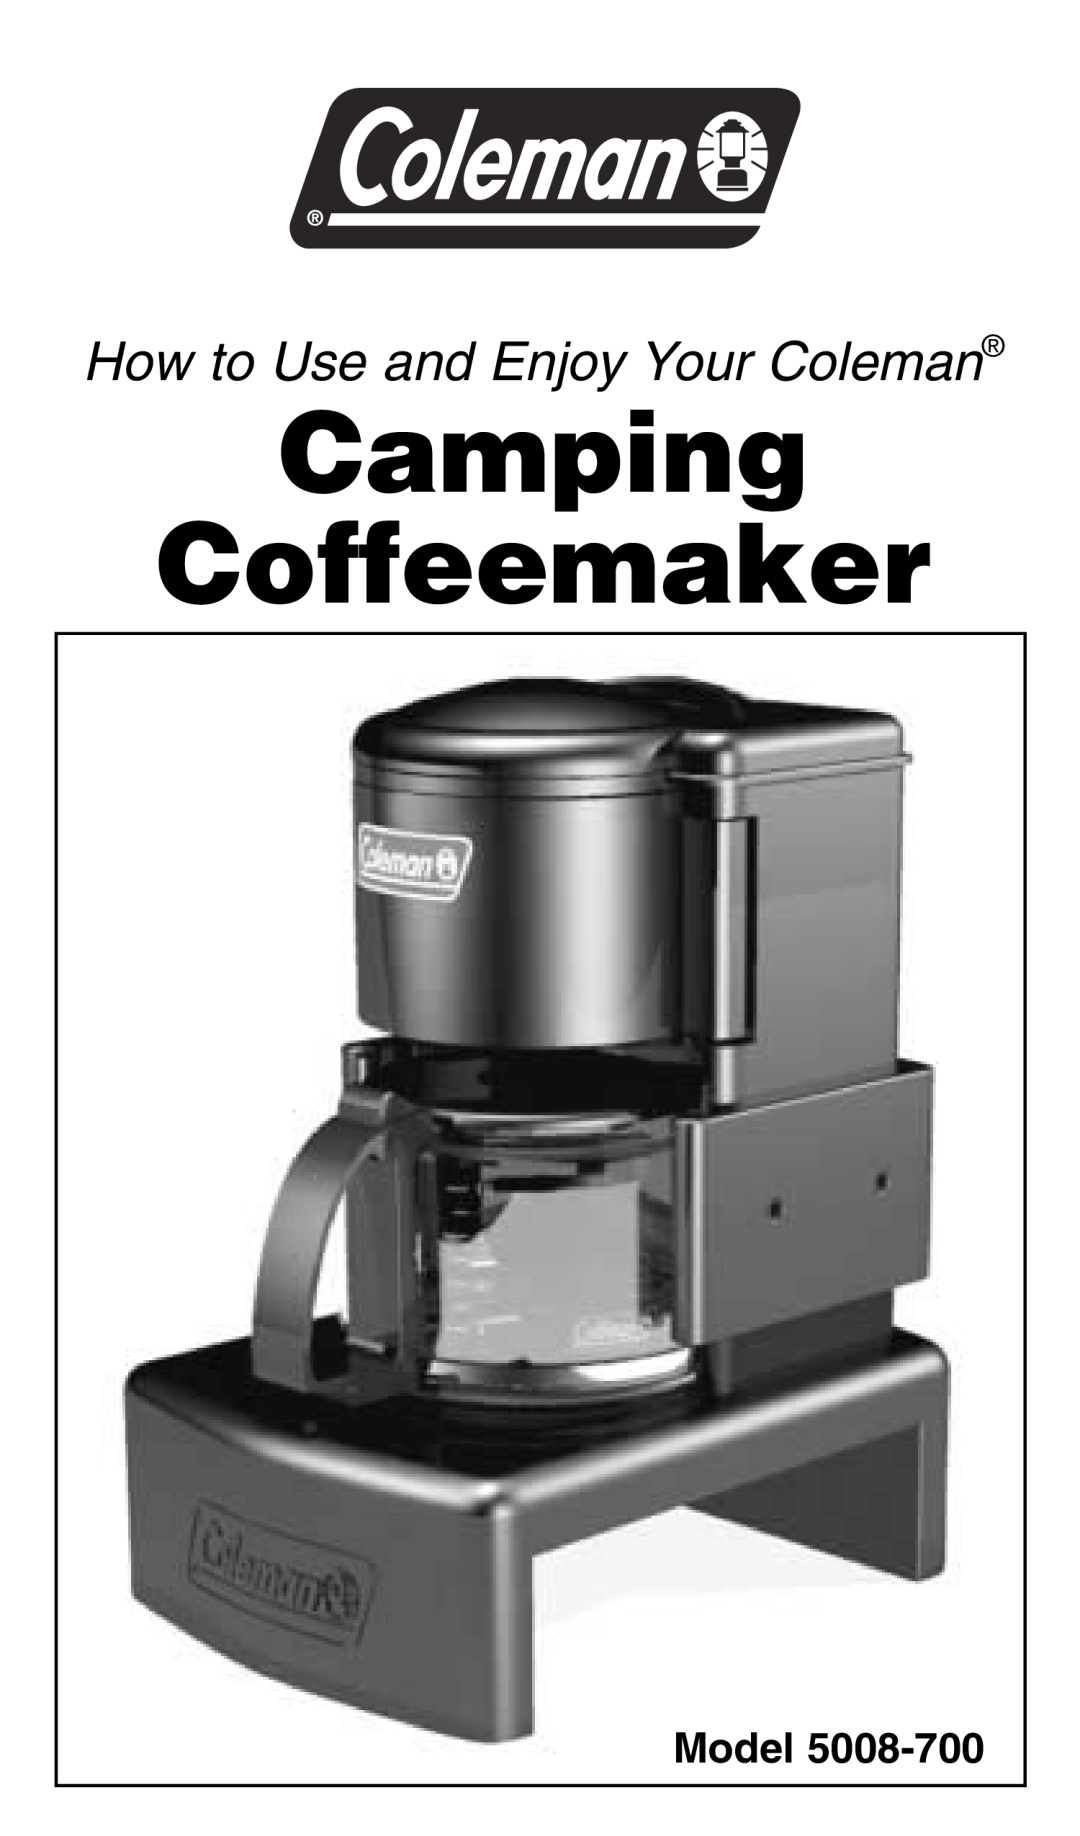 Coleman 5008-700 manual Camping Coffeemaker, How to Use and Enjoy Your Coleman, Model 